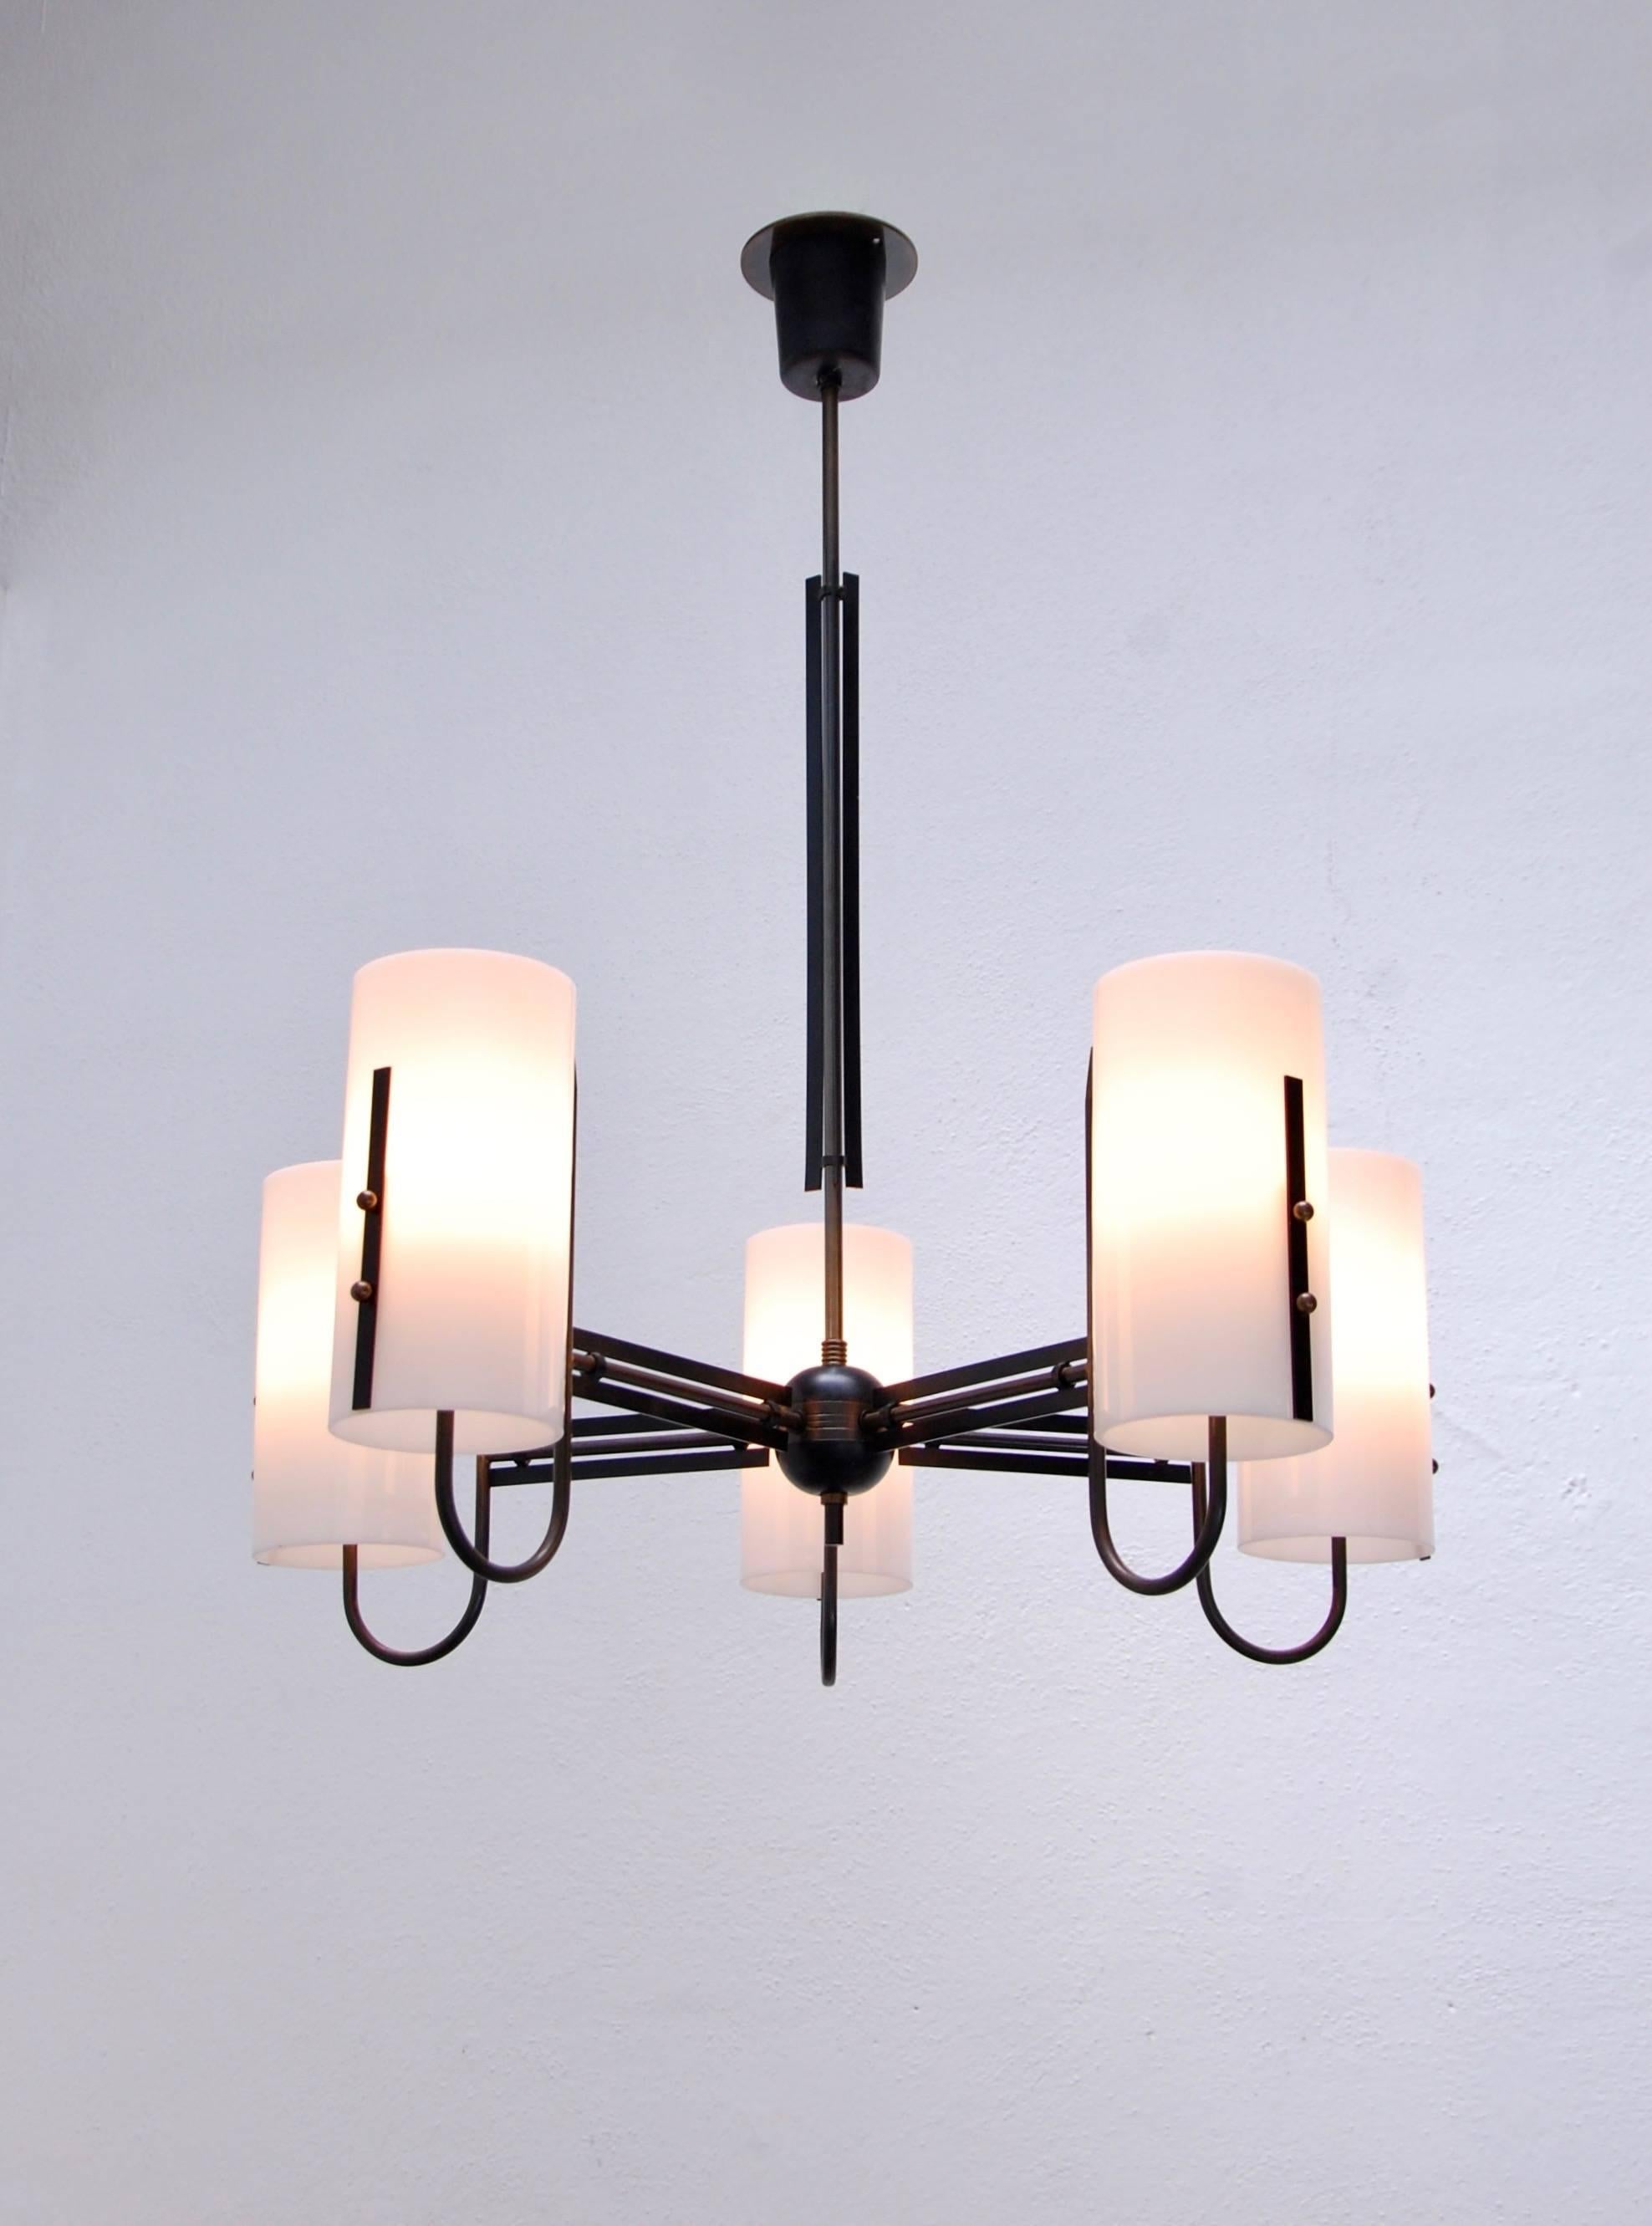 Of the period five shade petite Mid-Century chandelier from Italy. Fully restored, original brass finish, single E26 medium based socket per shade, wired for the US. Overall drop adjustable upon request. 

Measures: Overall drop: 39”
Fixture